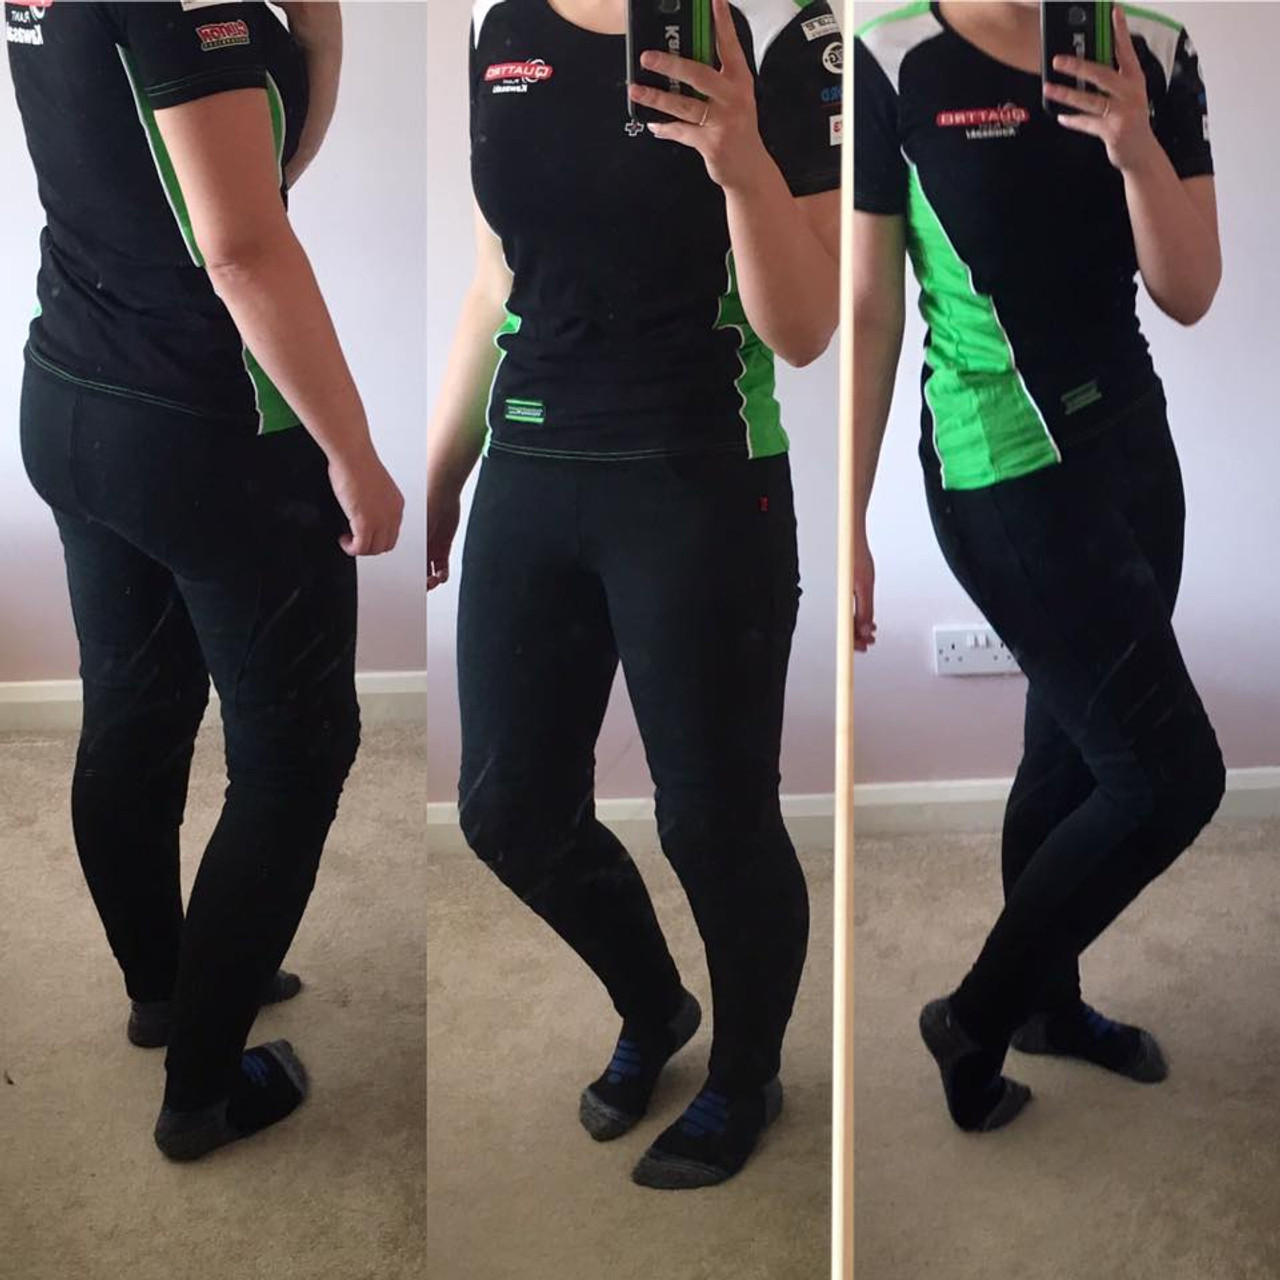 Review of the GOGO Gear Kevlar Leggings - Chicks and Machines